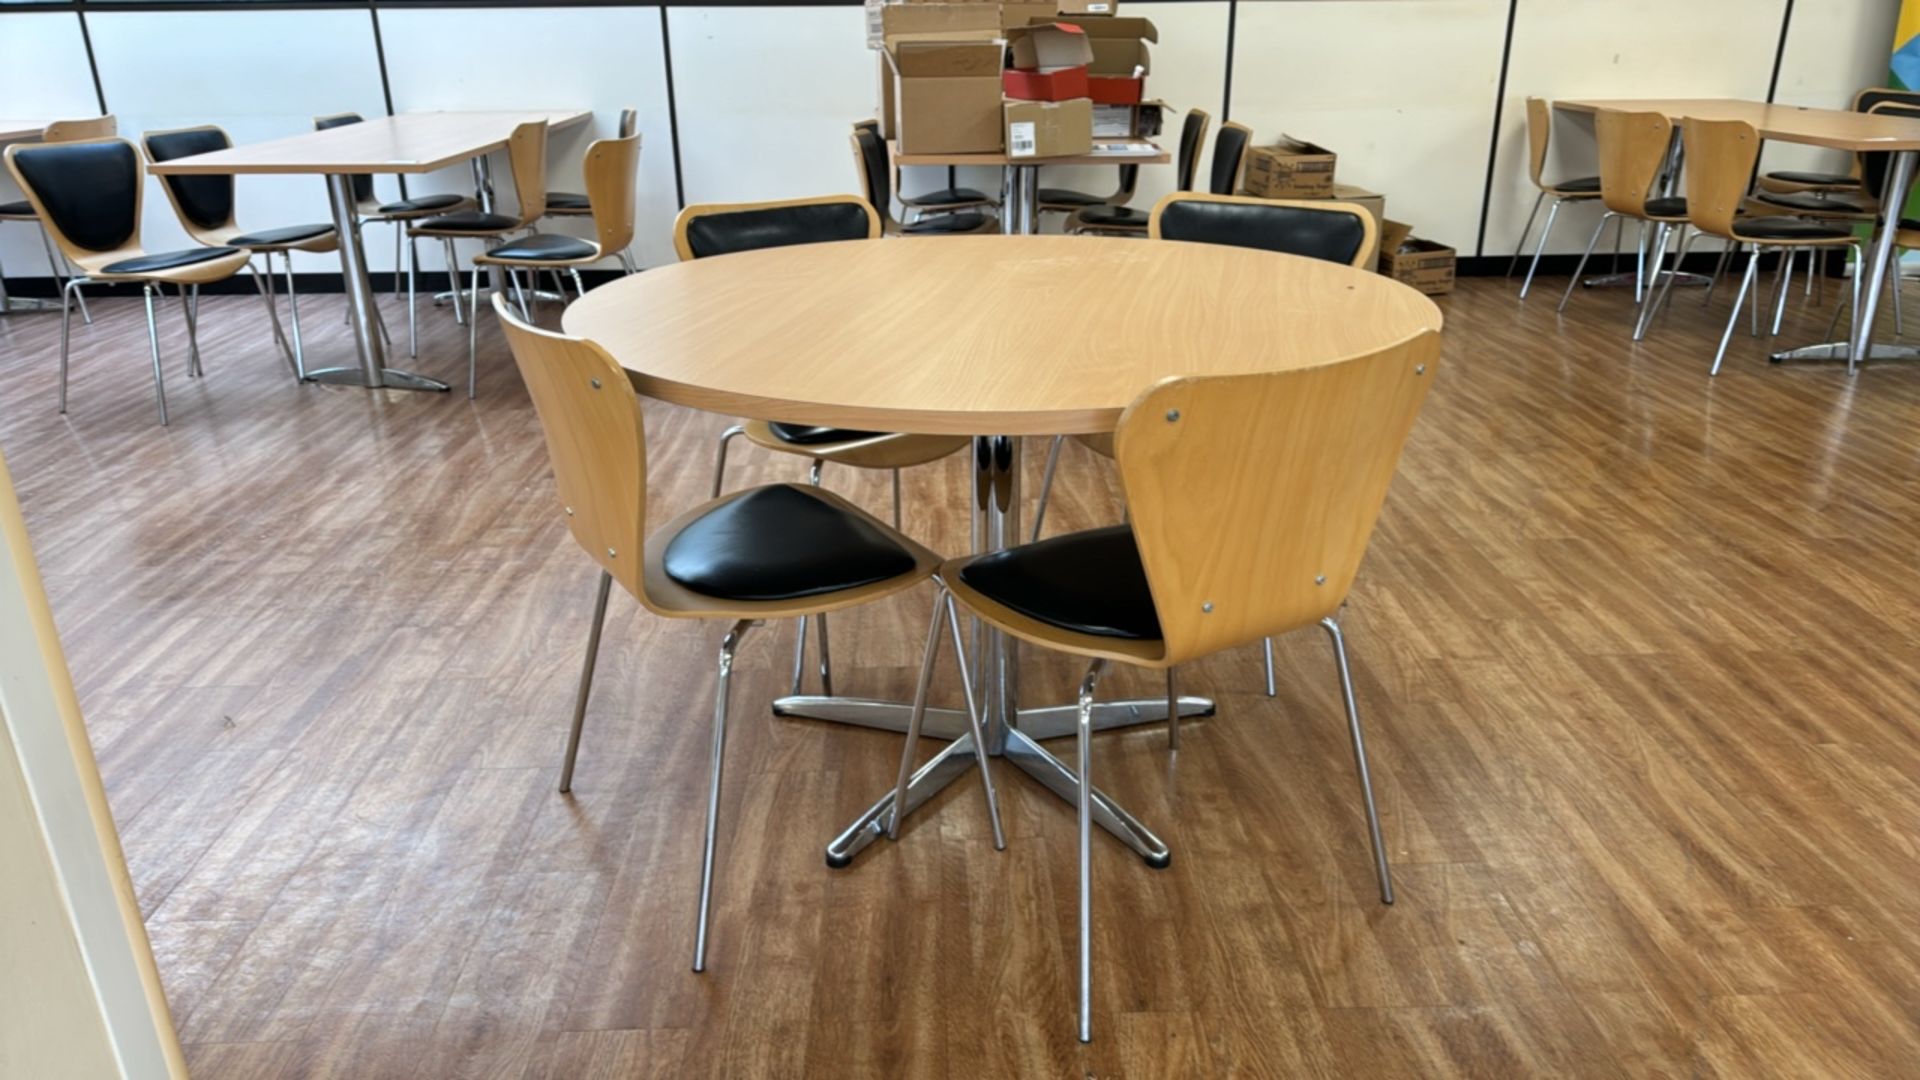 Round Cafeteria Table & Chairs x4